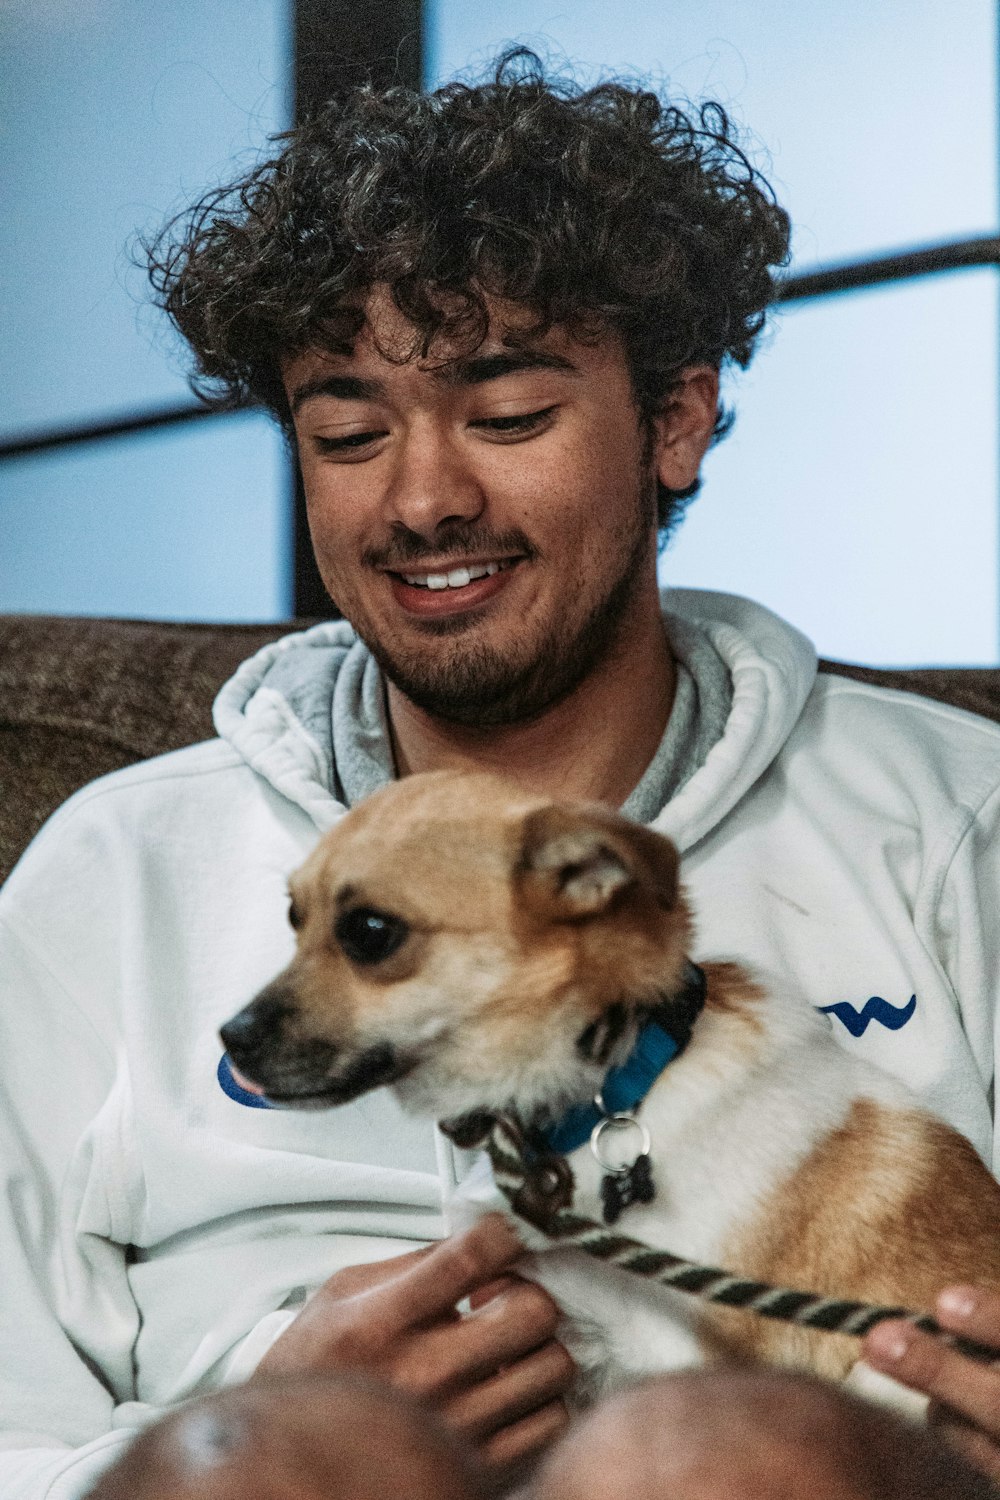 a man sitting on a couch holding a small dog